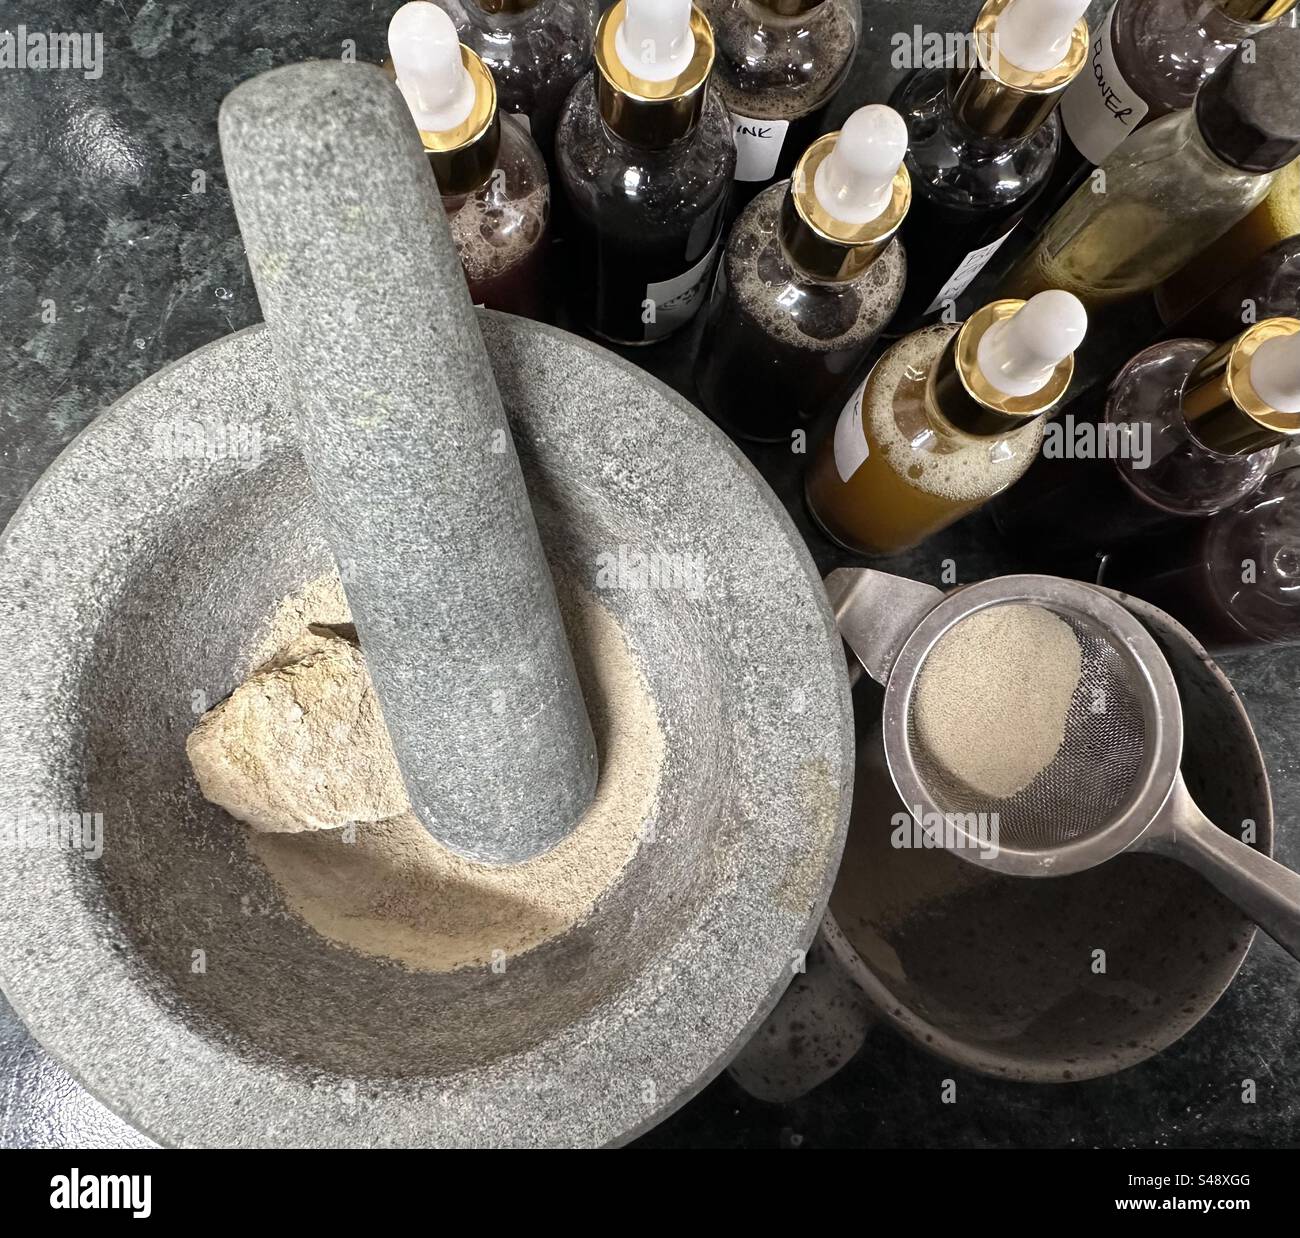 Pestle and mortar pigment Stock Photo